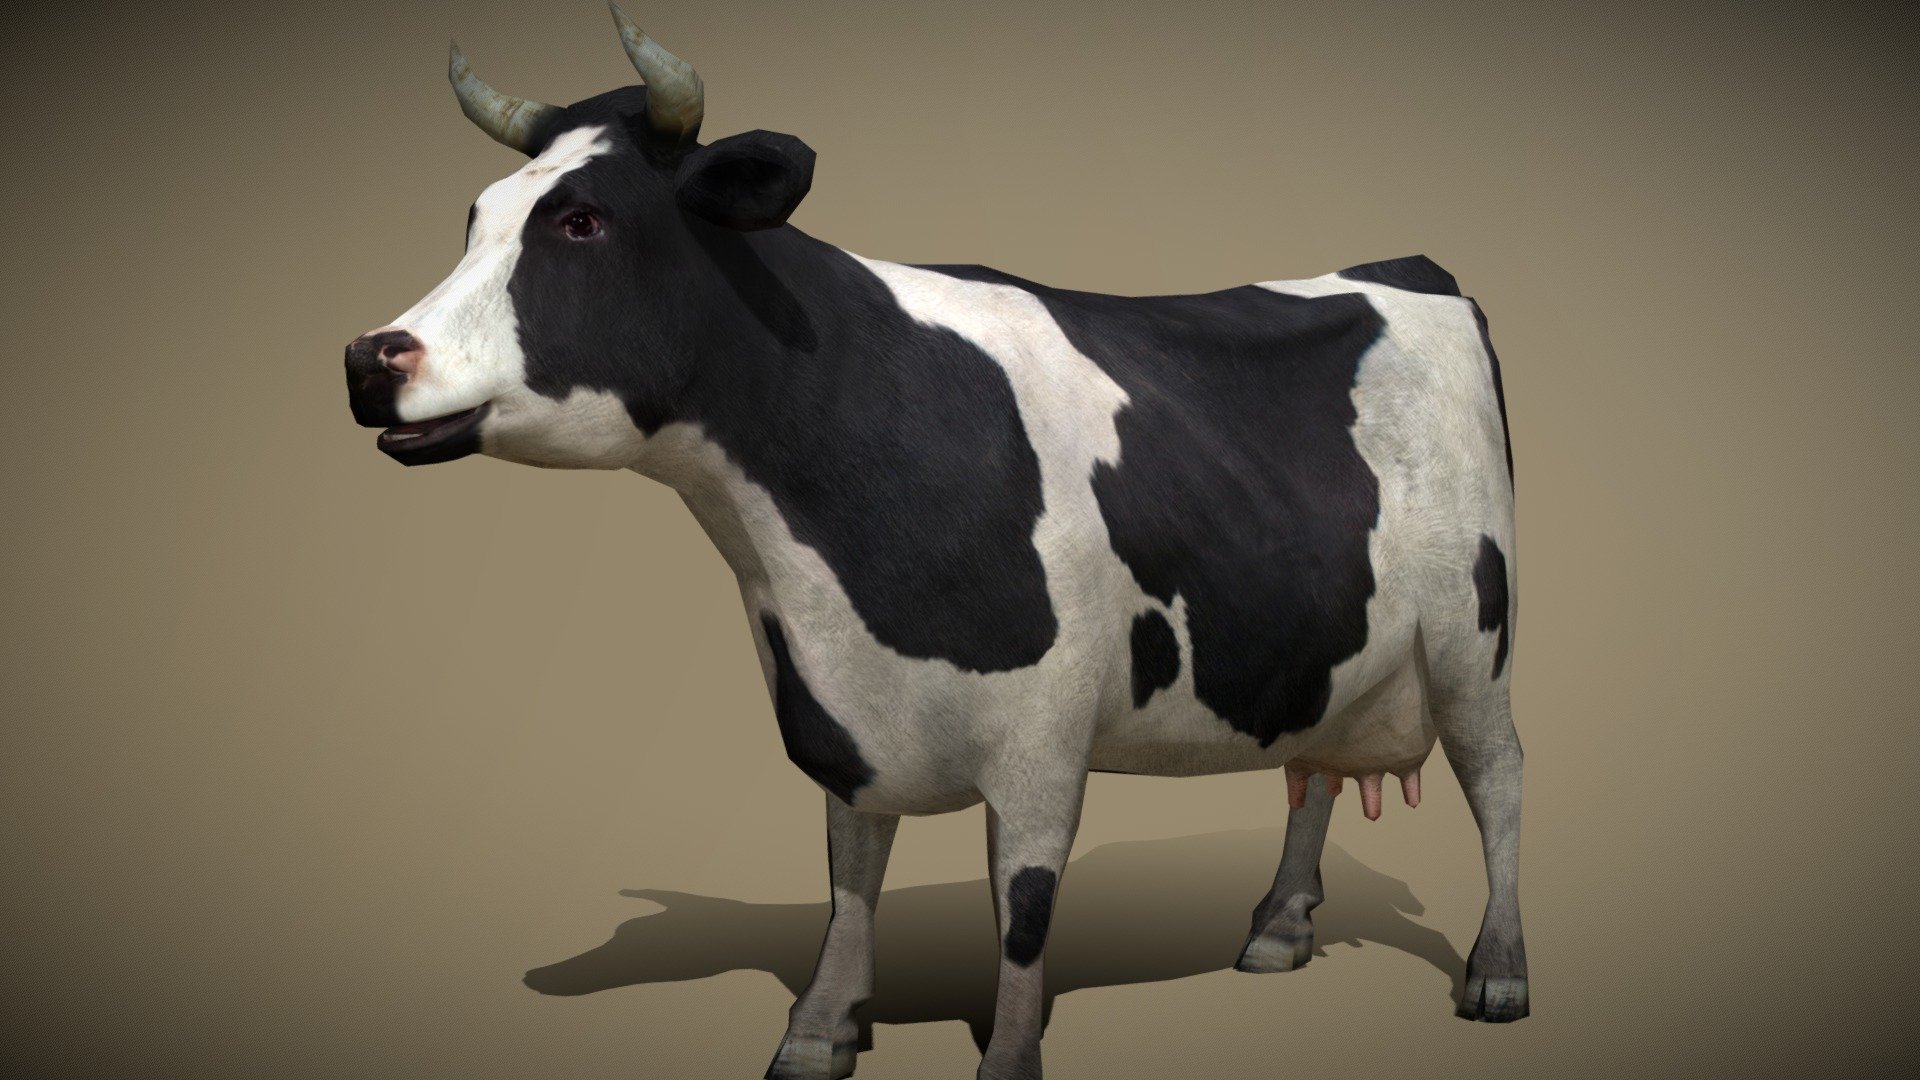 images of domestic animals cow